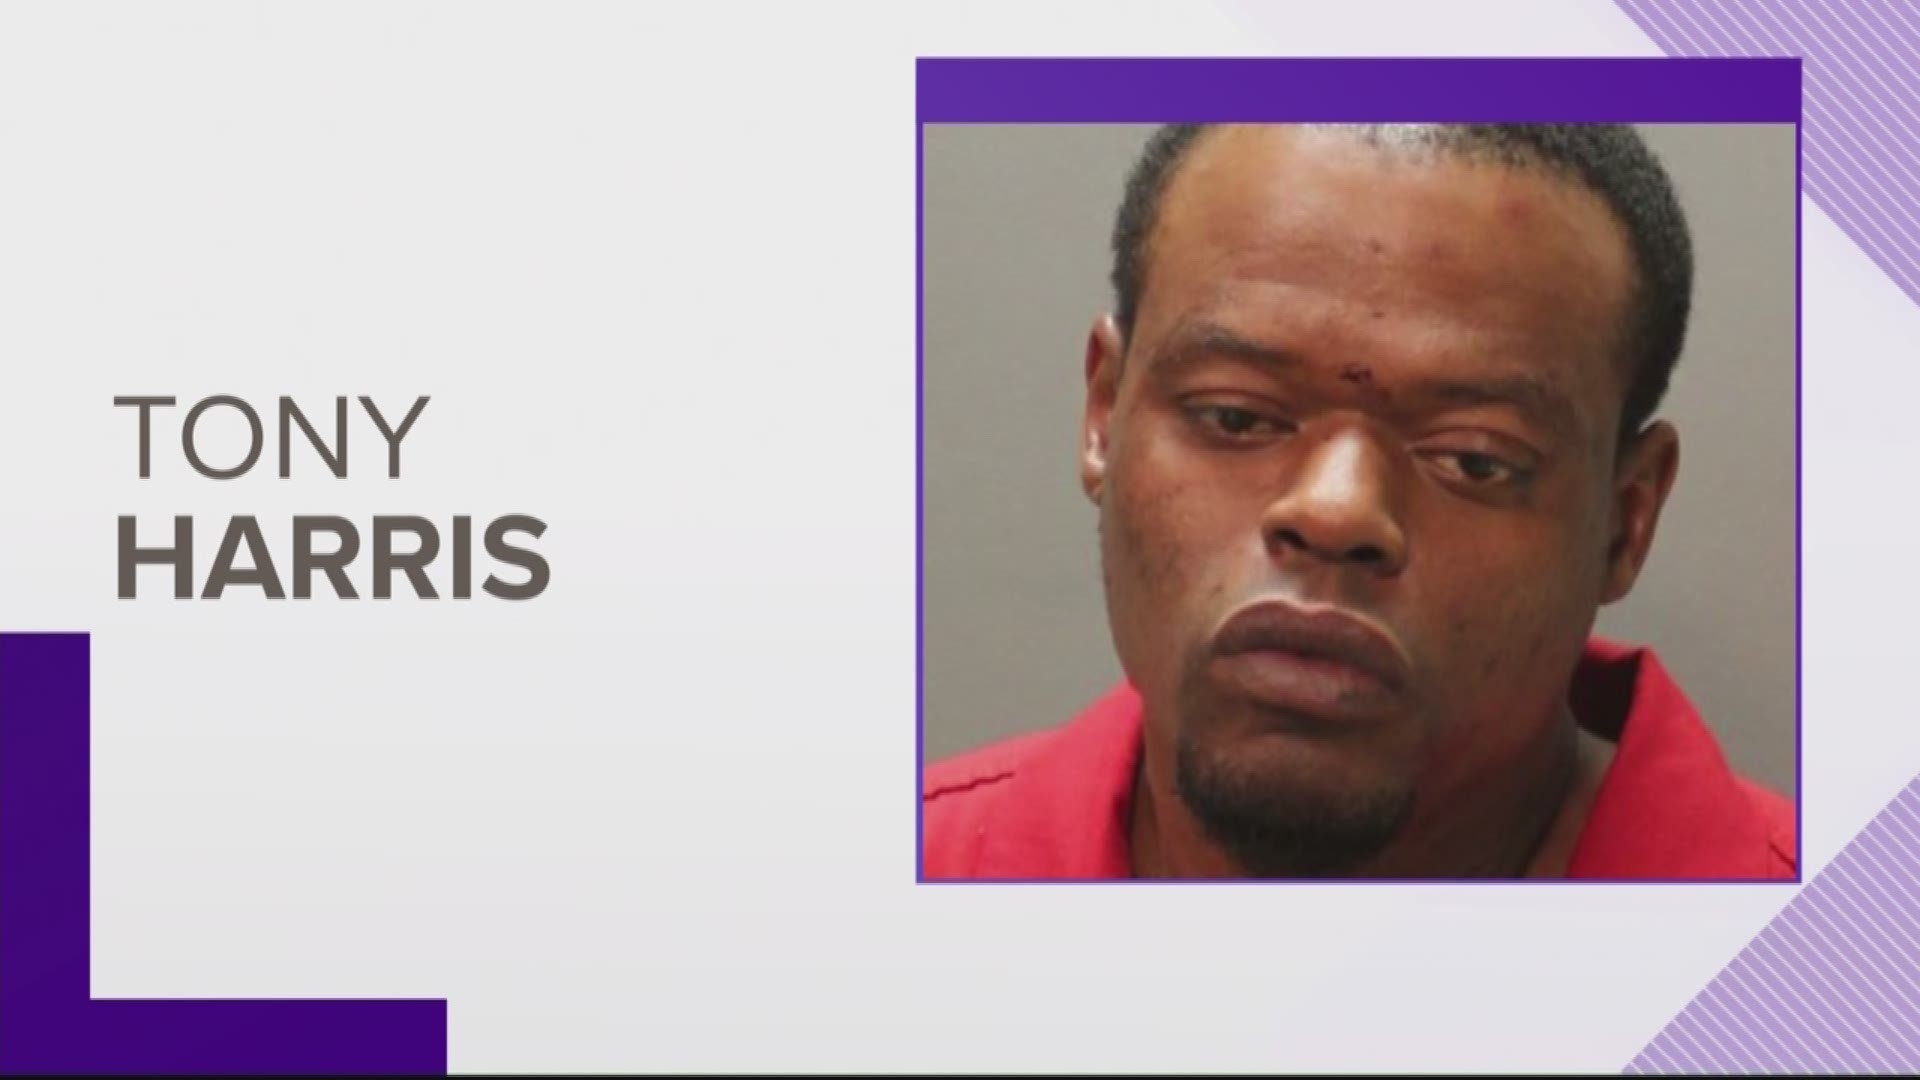 Tony Bernard Harris, 38, now faces two counts of attempted murder in the first degree with a weapon and one count of resisting officer without violence.